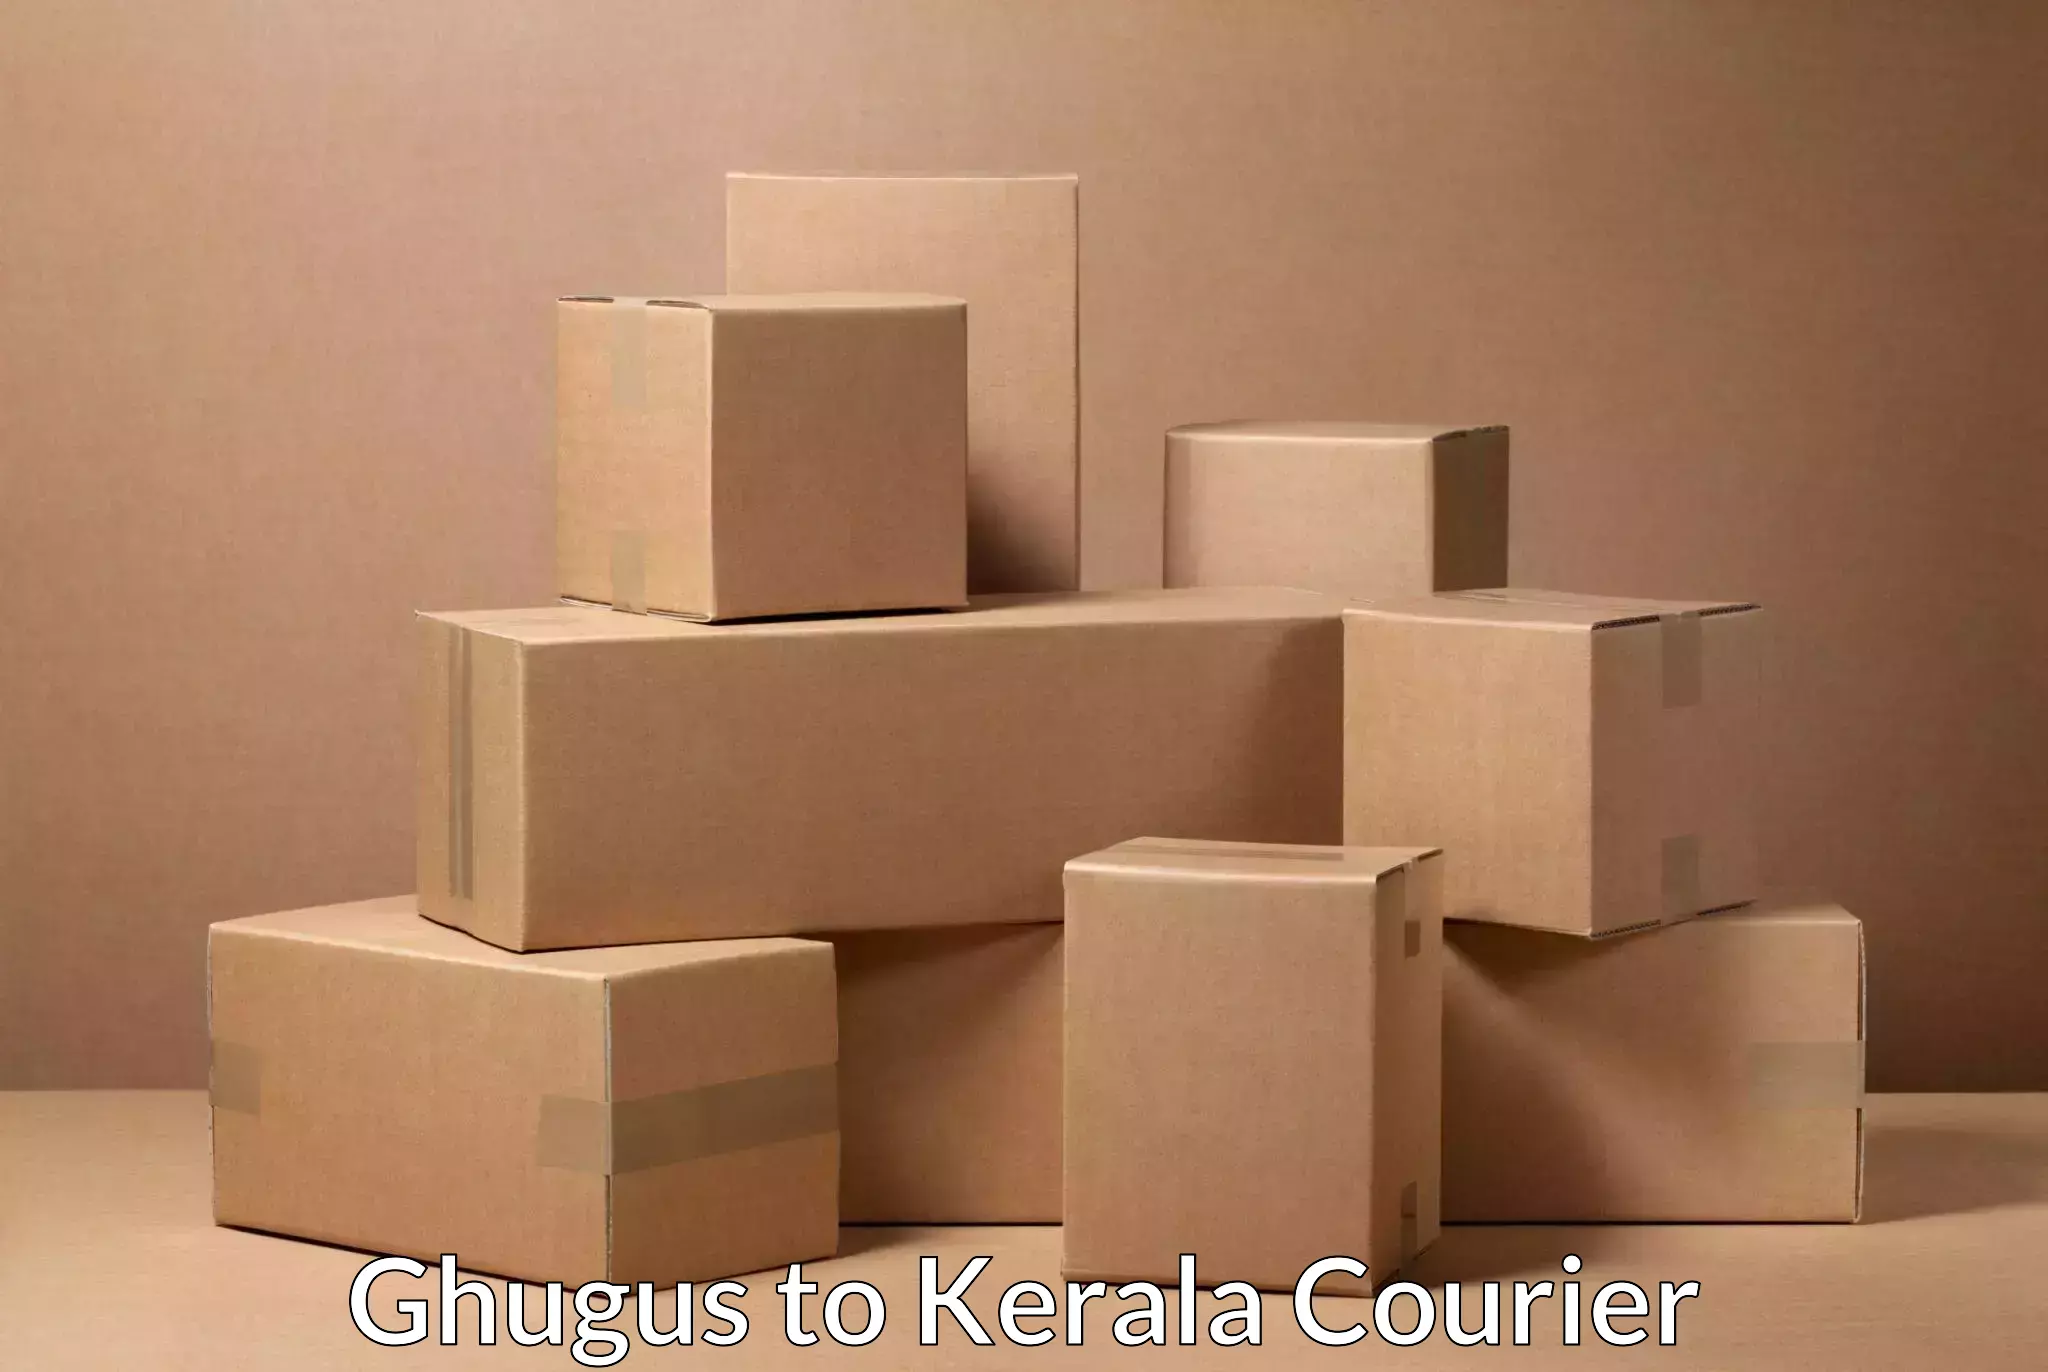 Customer-centric shipping Ghugus to Perumbavoor